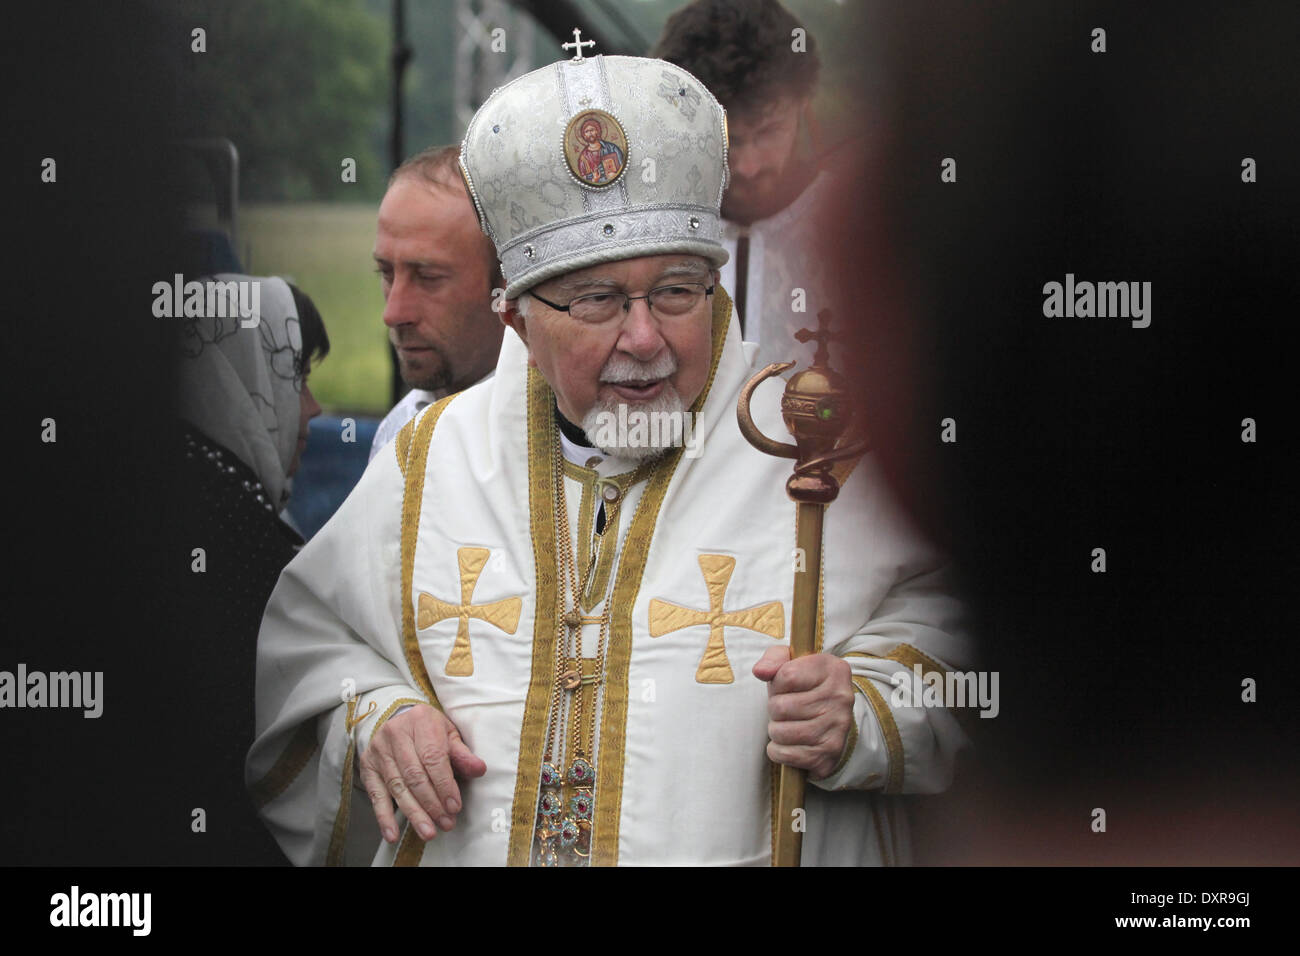 Archbishop Simeon of Brno and Olomouc attends an orthodox service in honour of St Cyril and Methodius in Mikulcice, Czech Rep. Stock Photo